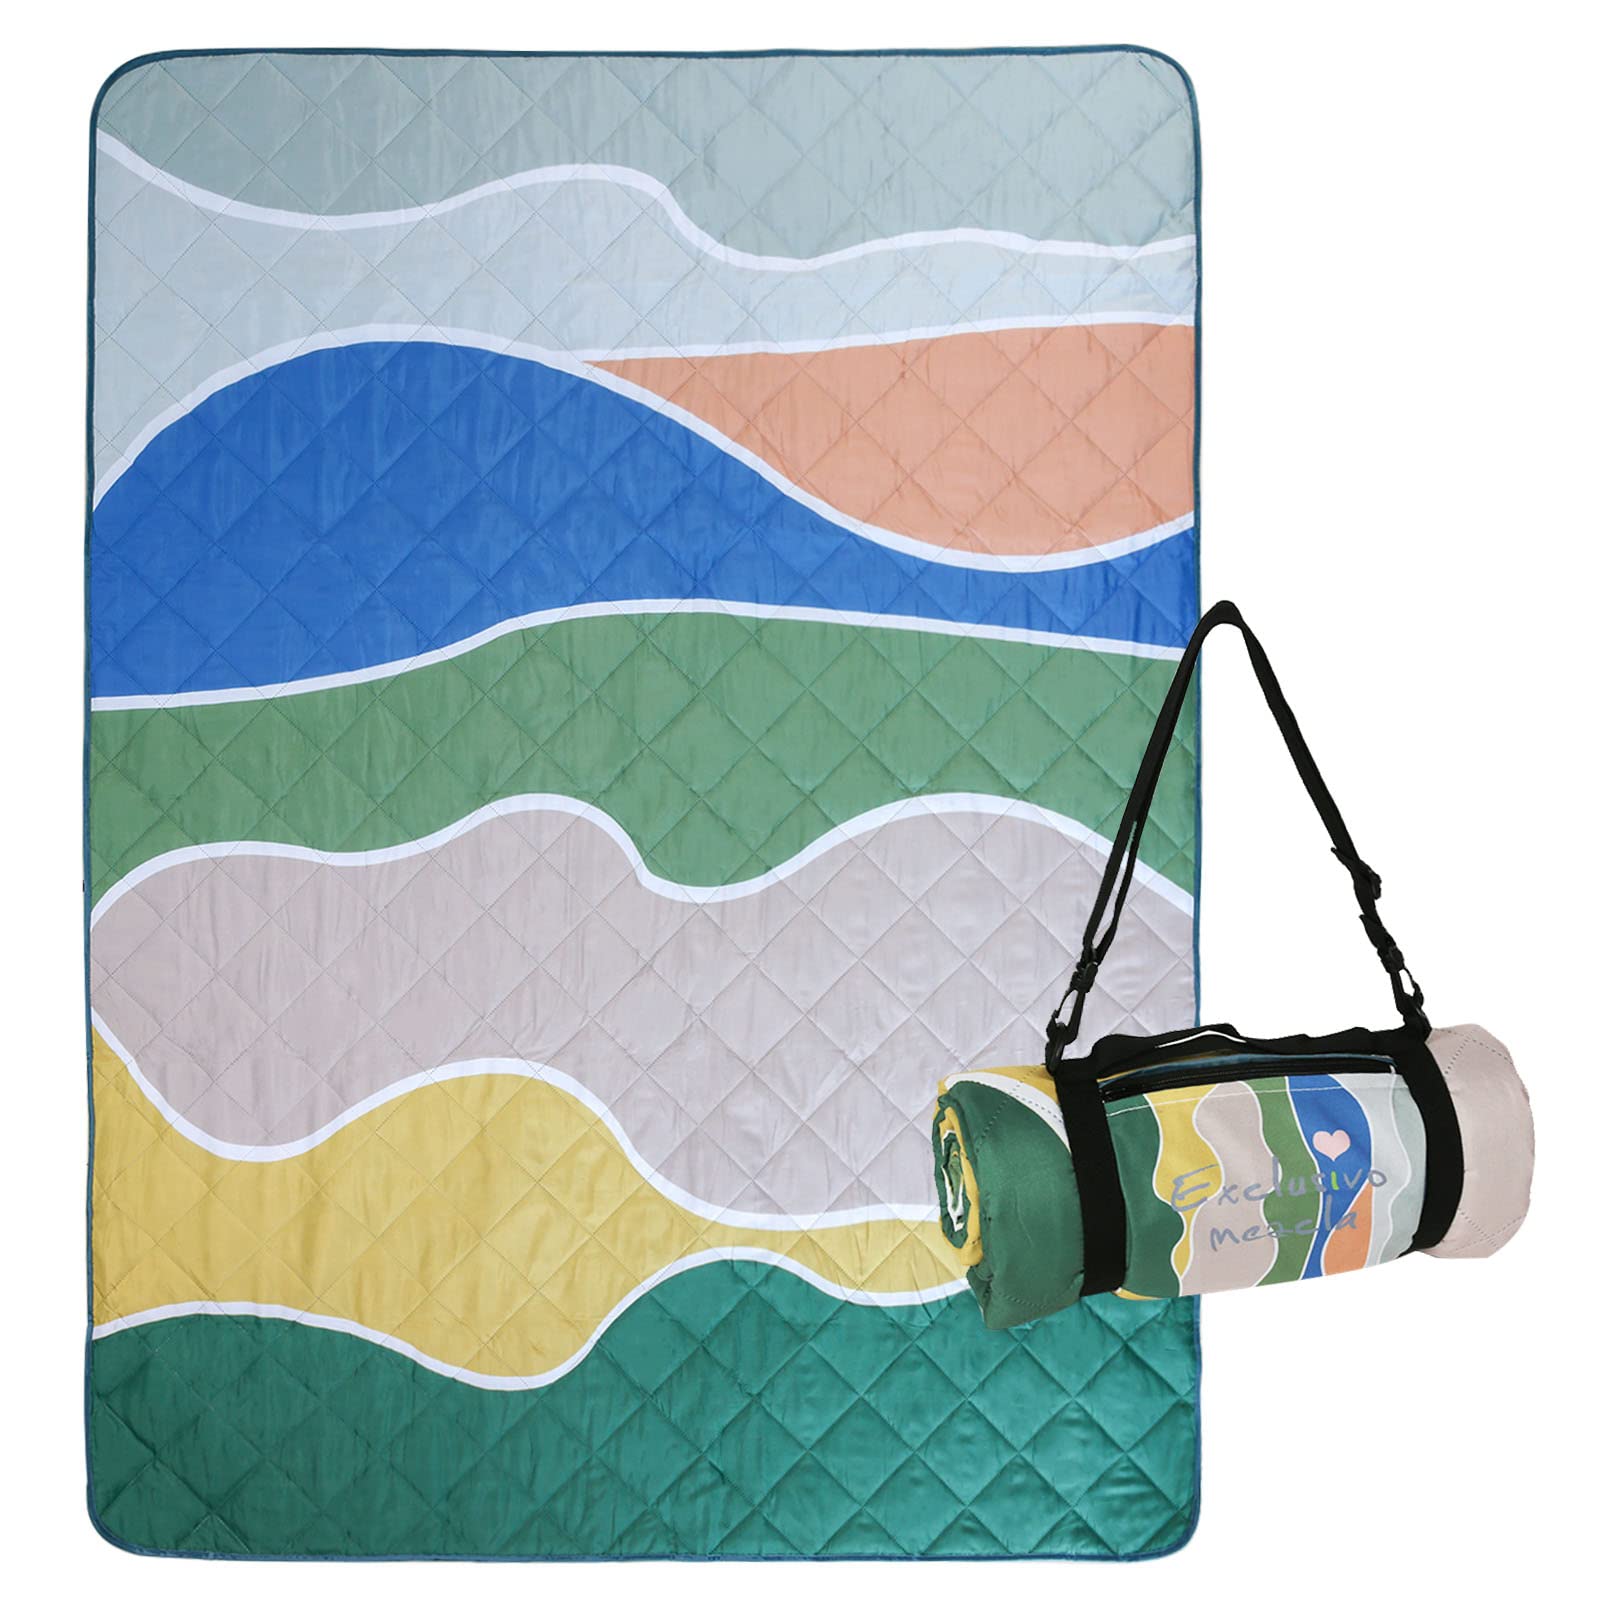 Exclusivo Mezcla Portable Waterproof Picnic Blankets 3 Layers 150X200cm Large Sandproof Beach Blankets, Foldable Outdoor Blanket for Camping on Grass Picnic Mat with 4 Windproof Stakes.